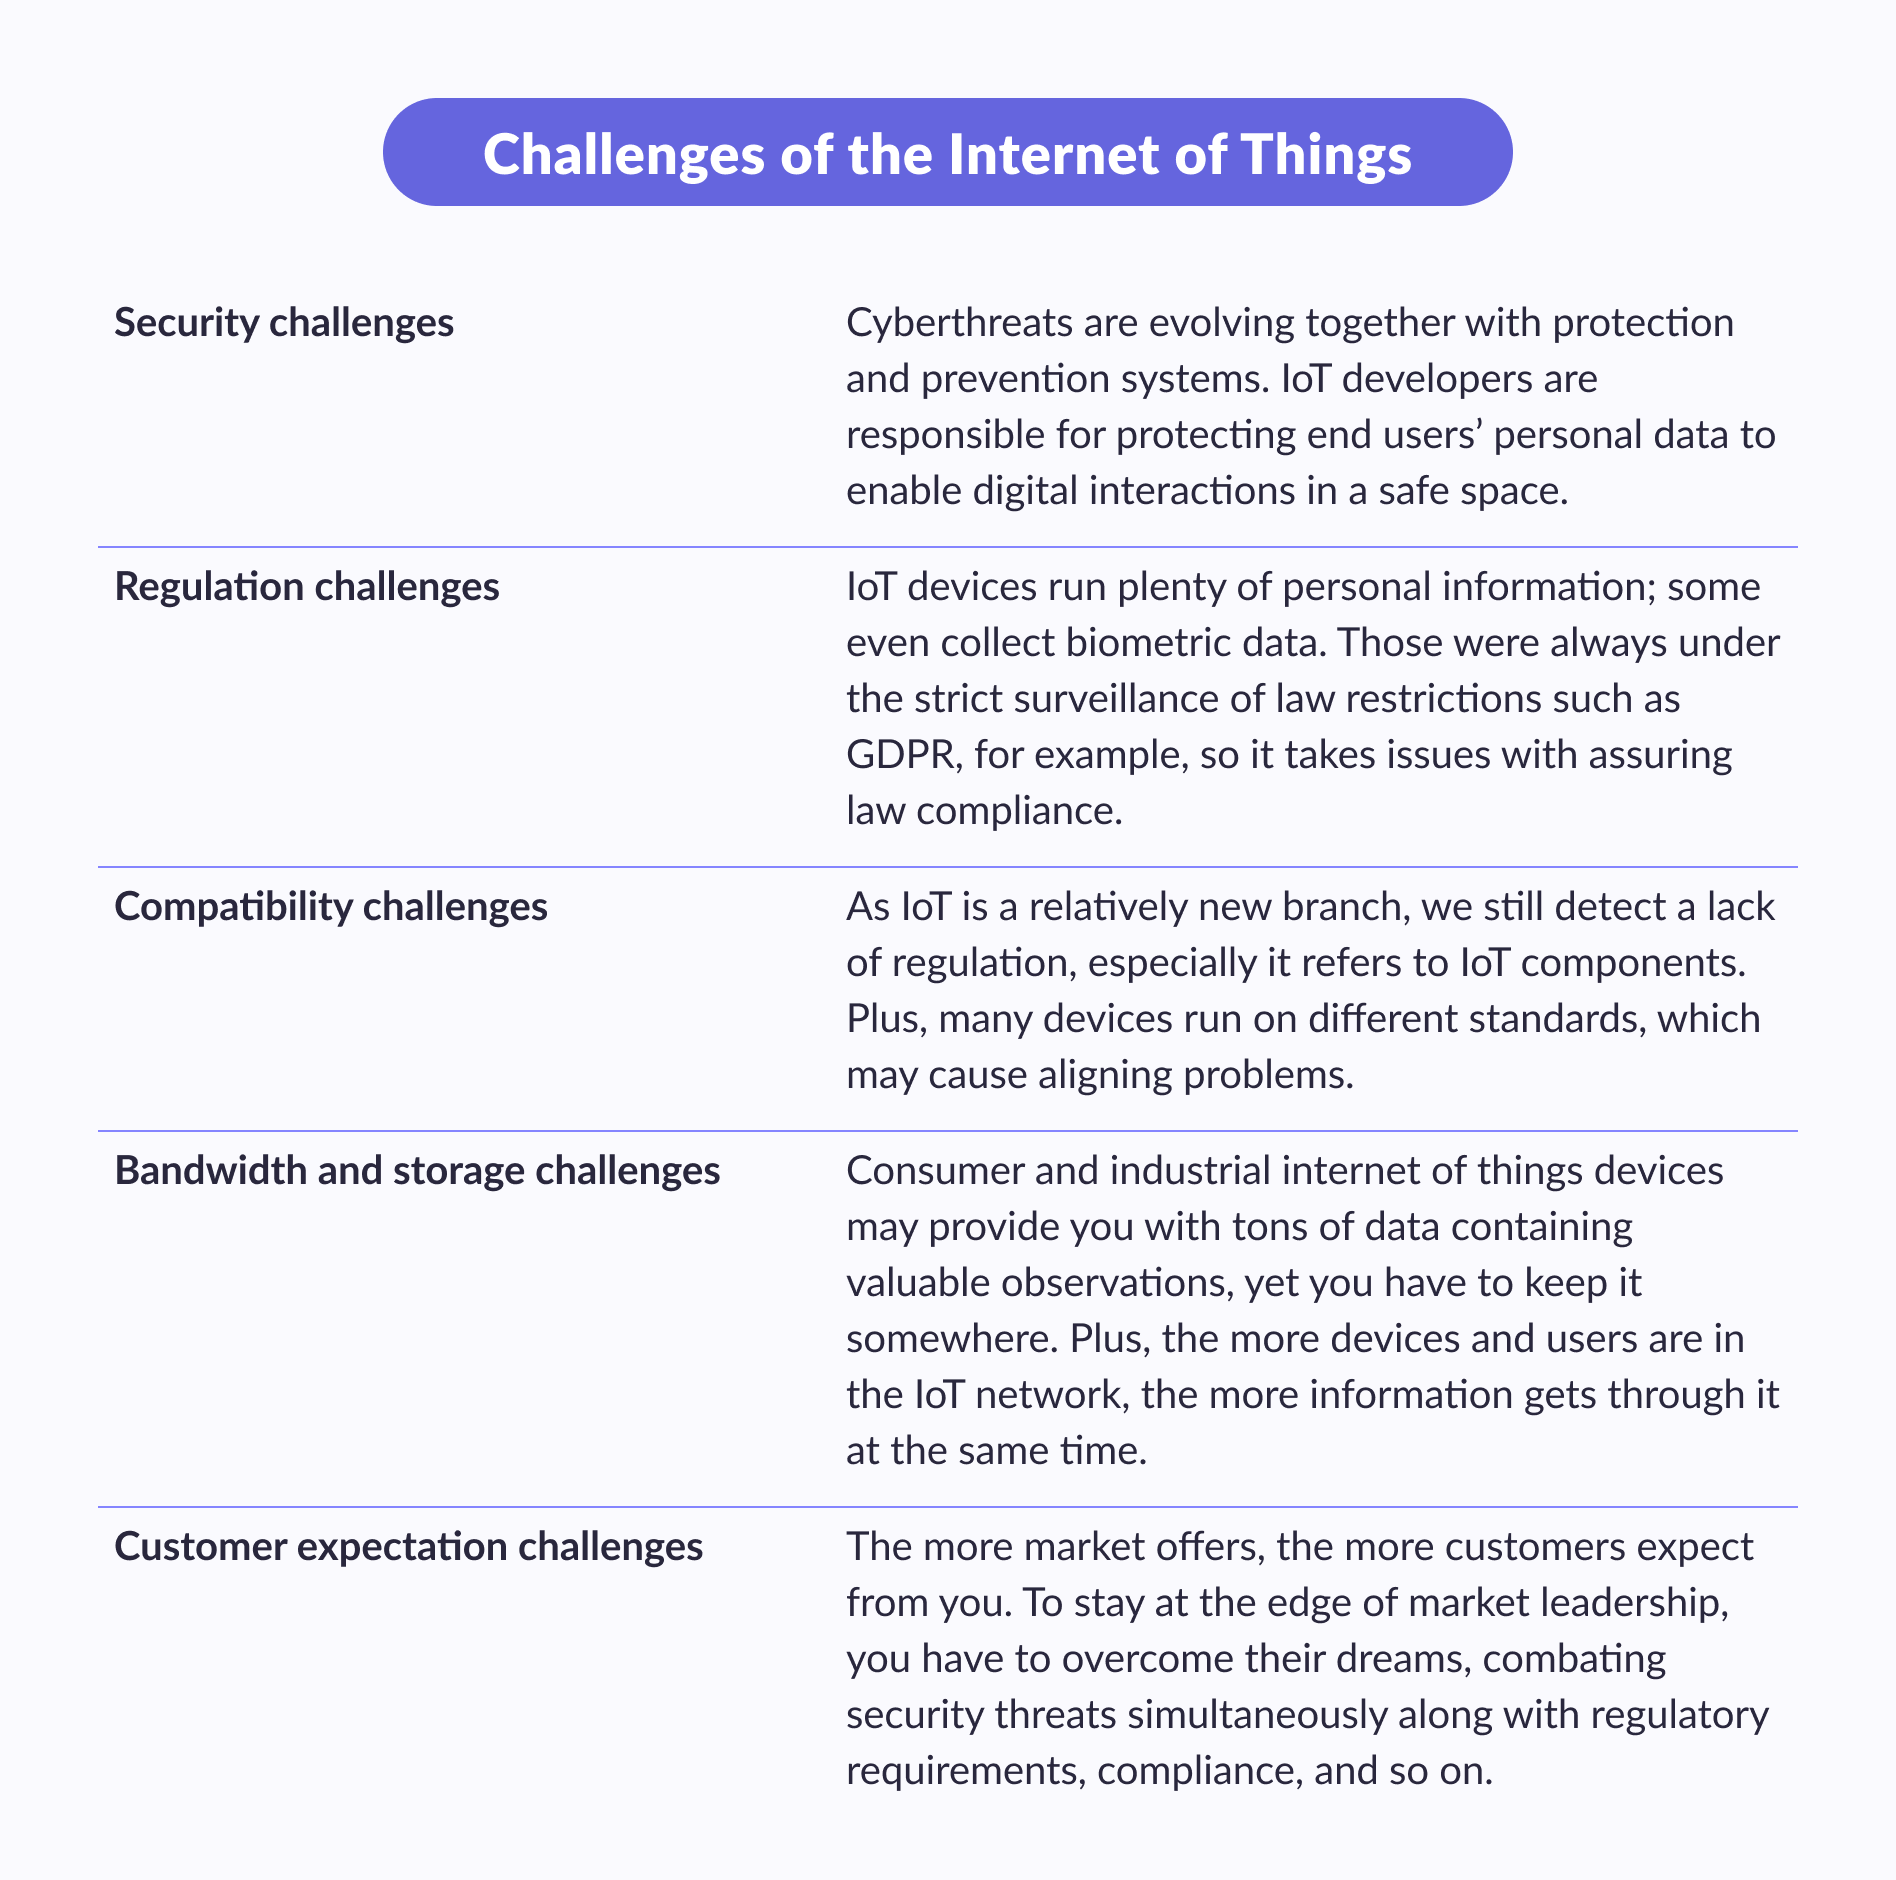 Challenges of the Internet of Things